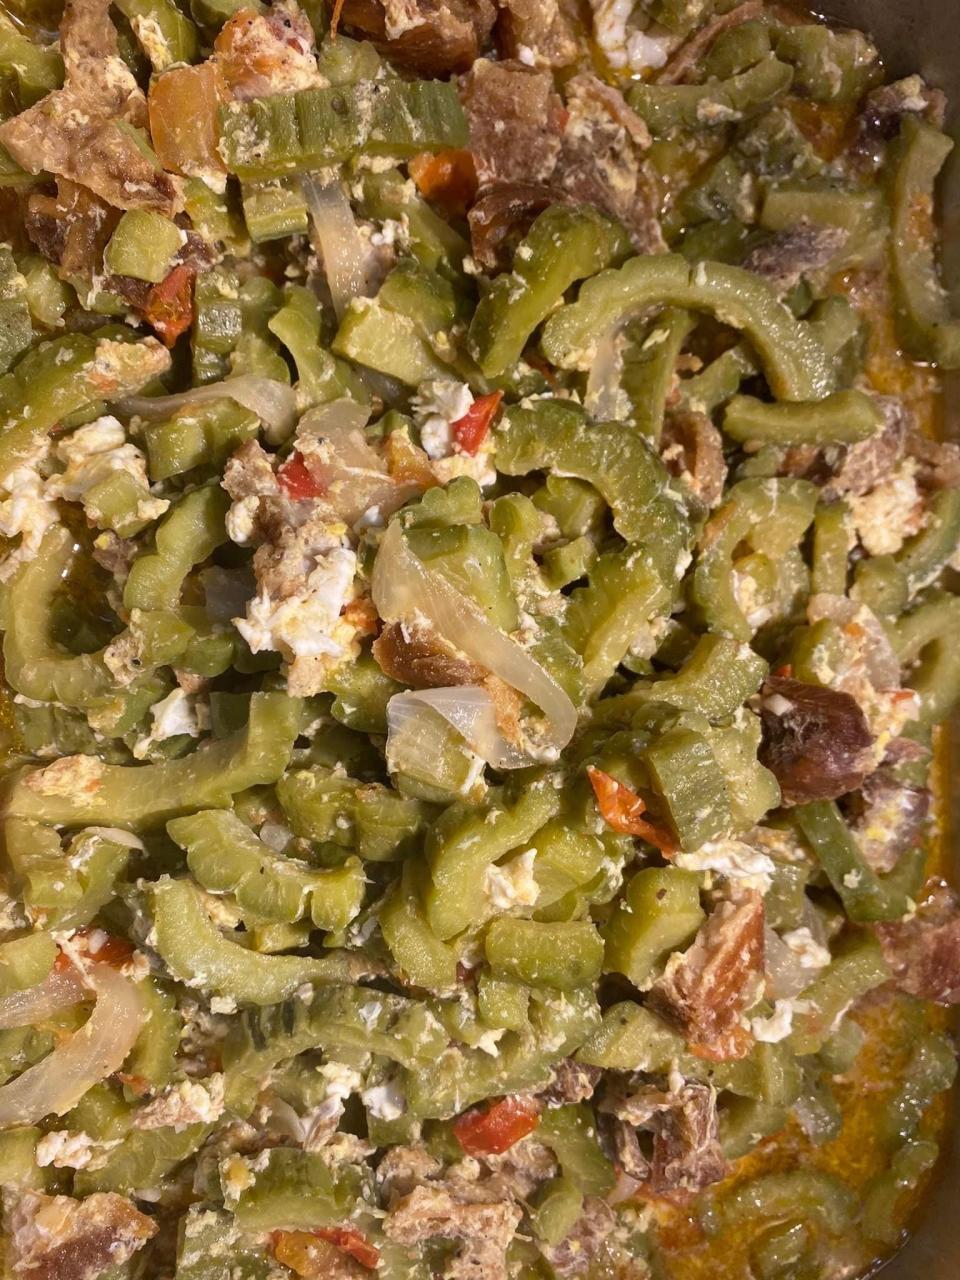 Ginisang ampalaya is bittermelon sauteed with tomatoes, pork and shrimp.